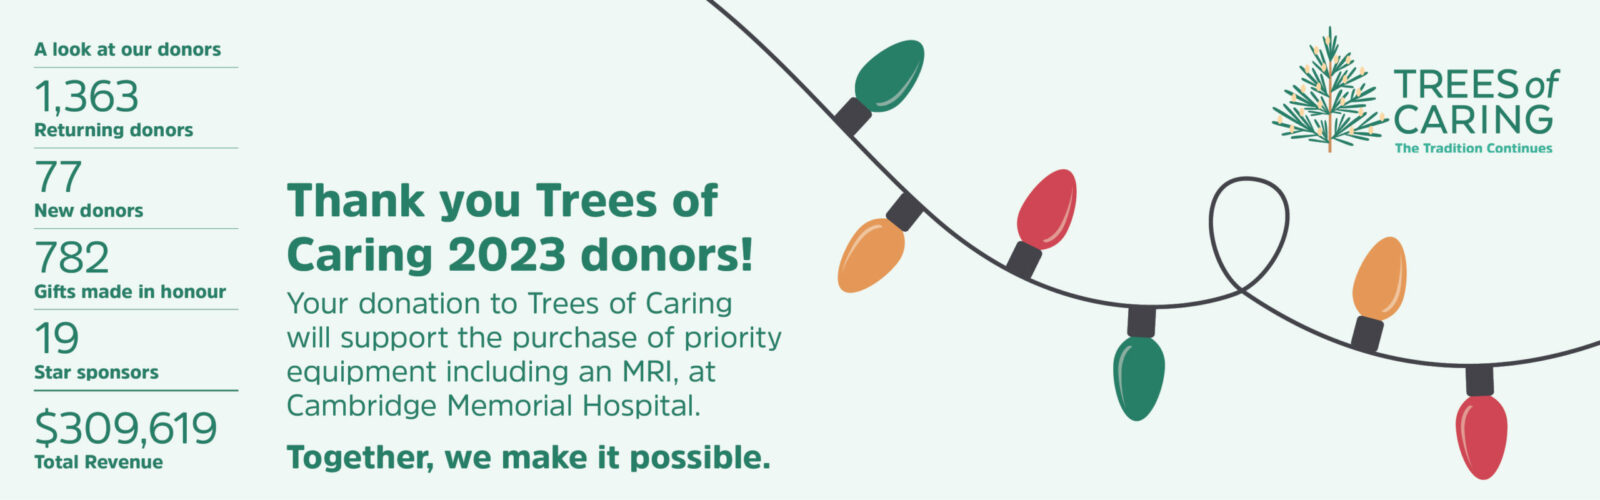 Thank you Trees of Caring donors